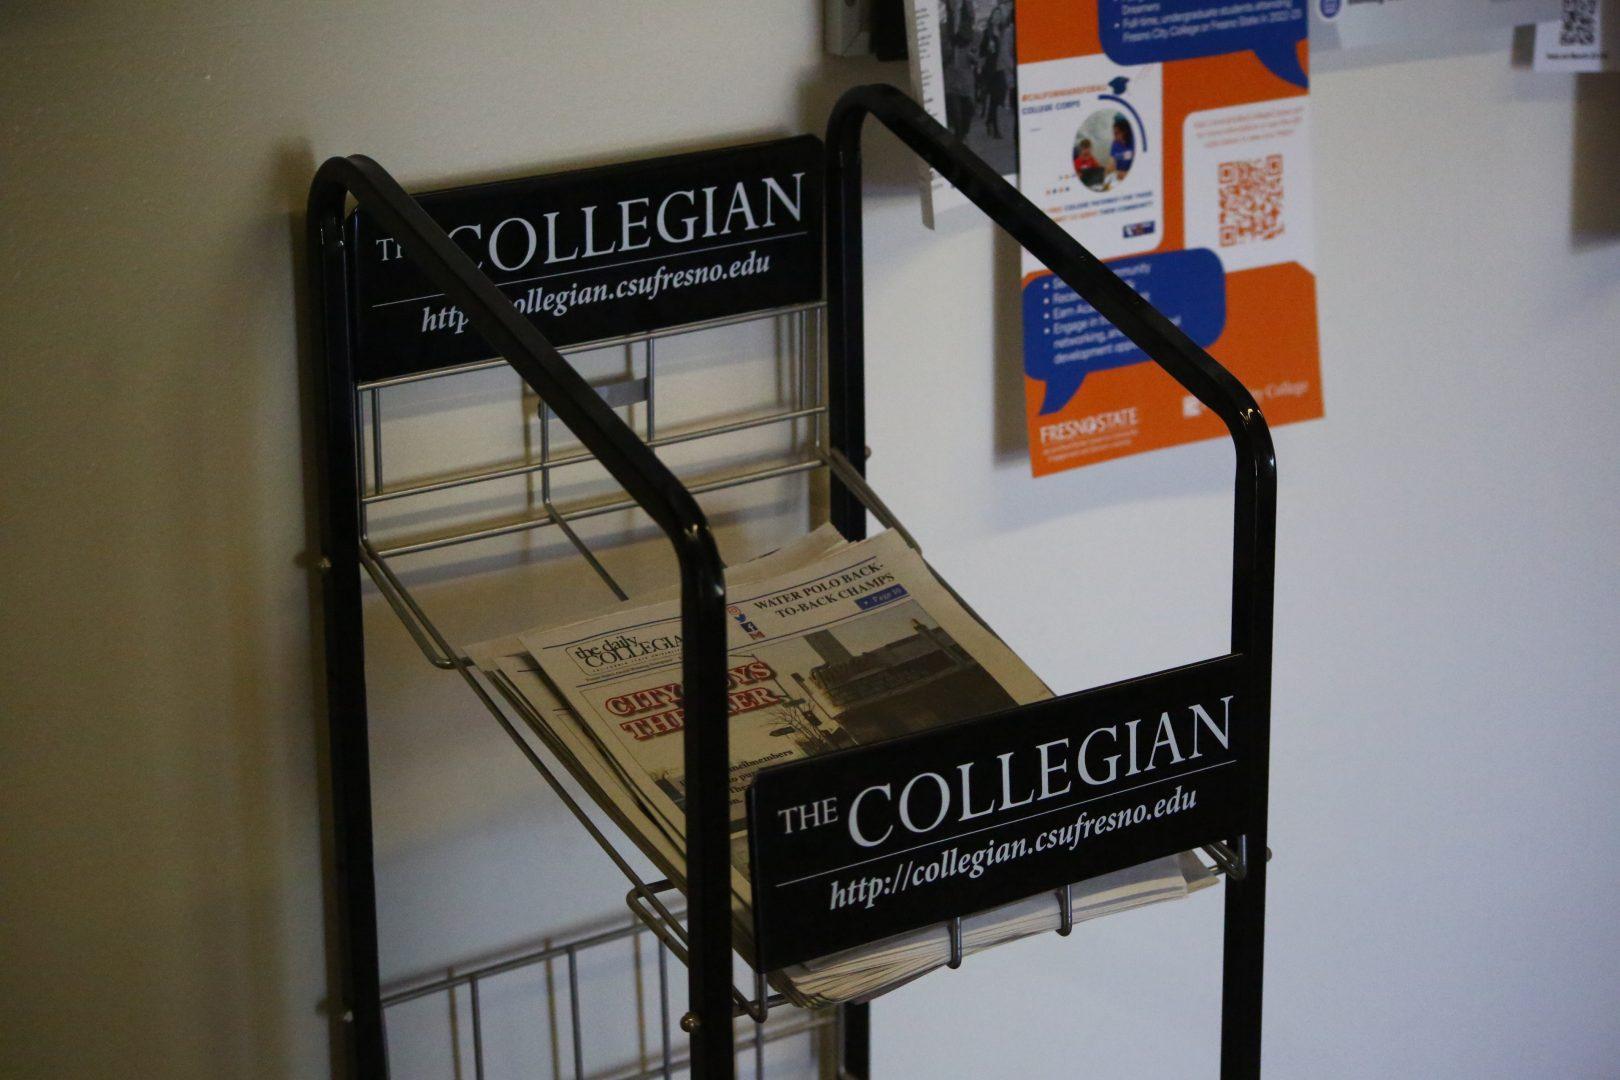 One of the stands offering a free copy of The Collegian on campus. (Adam Ricardo Solis/The Collegian)